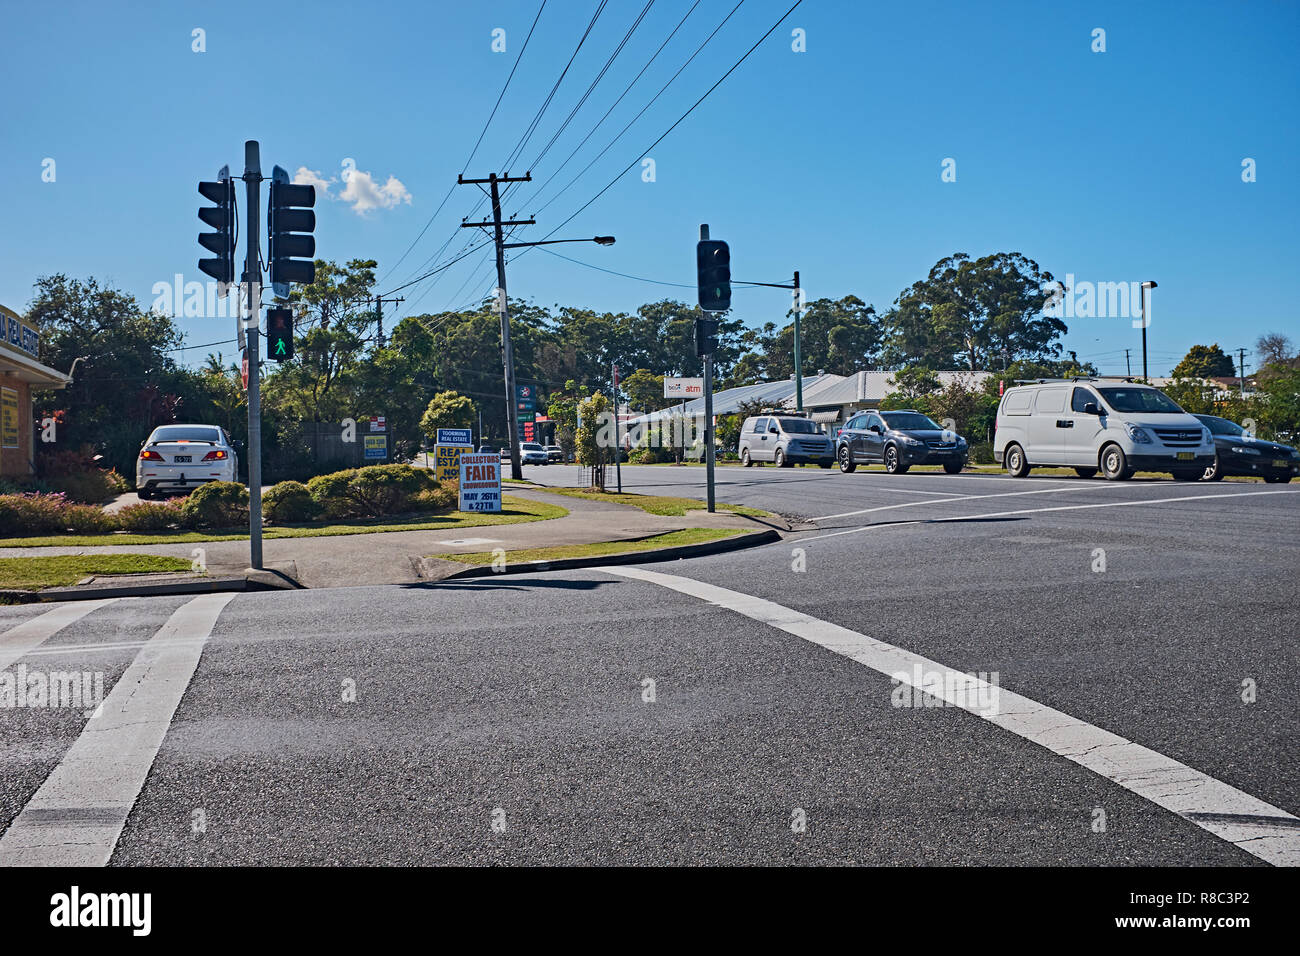 Traffic waiting at a junction on a road while the pedestrian crossing symbol shows green, Toormina, New South Wales, Australia Stock Photo